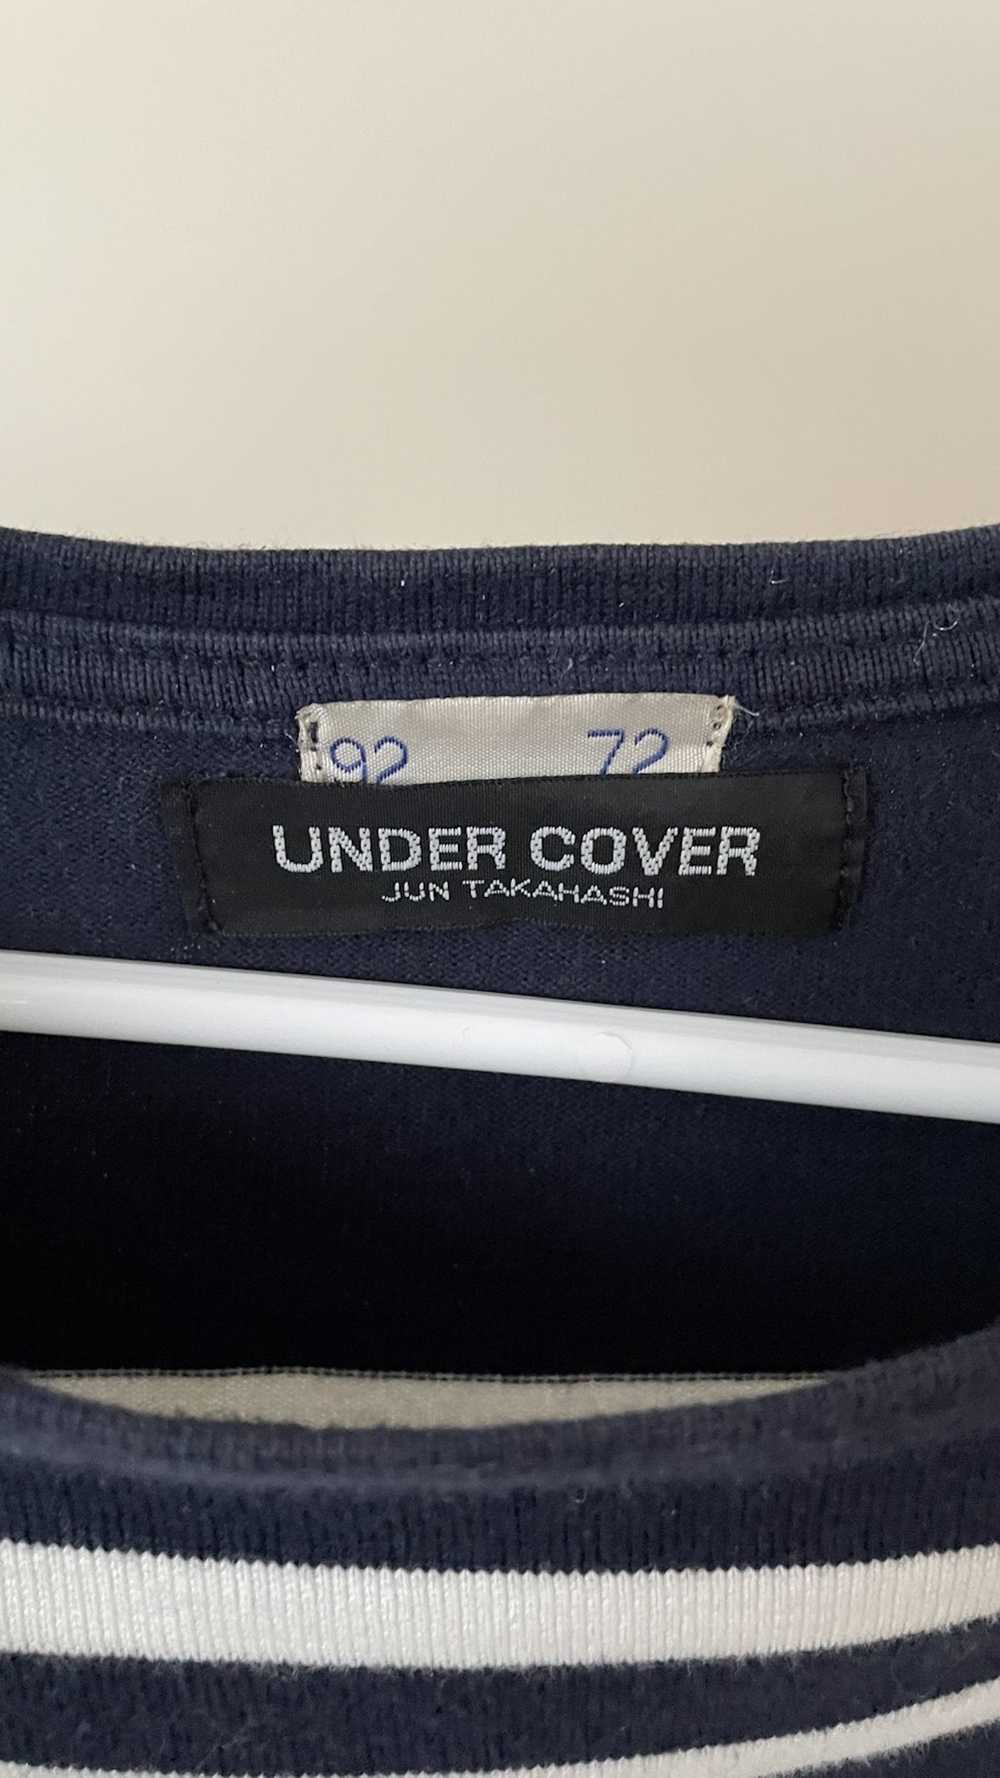 Undercover Undercover MAD longsleeve - image 3